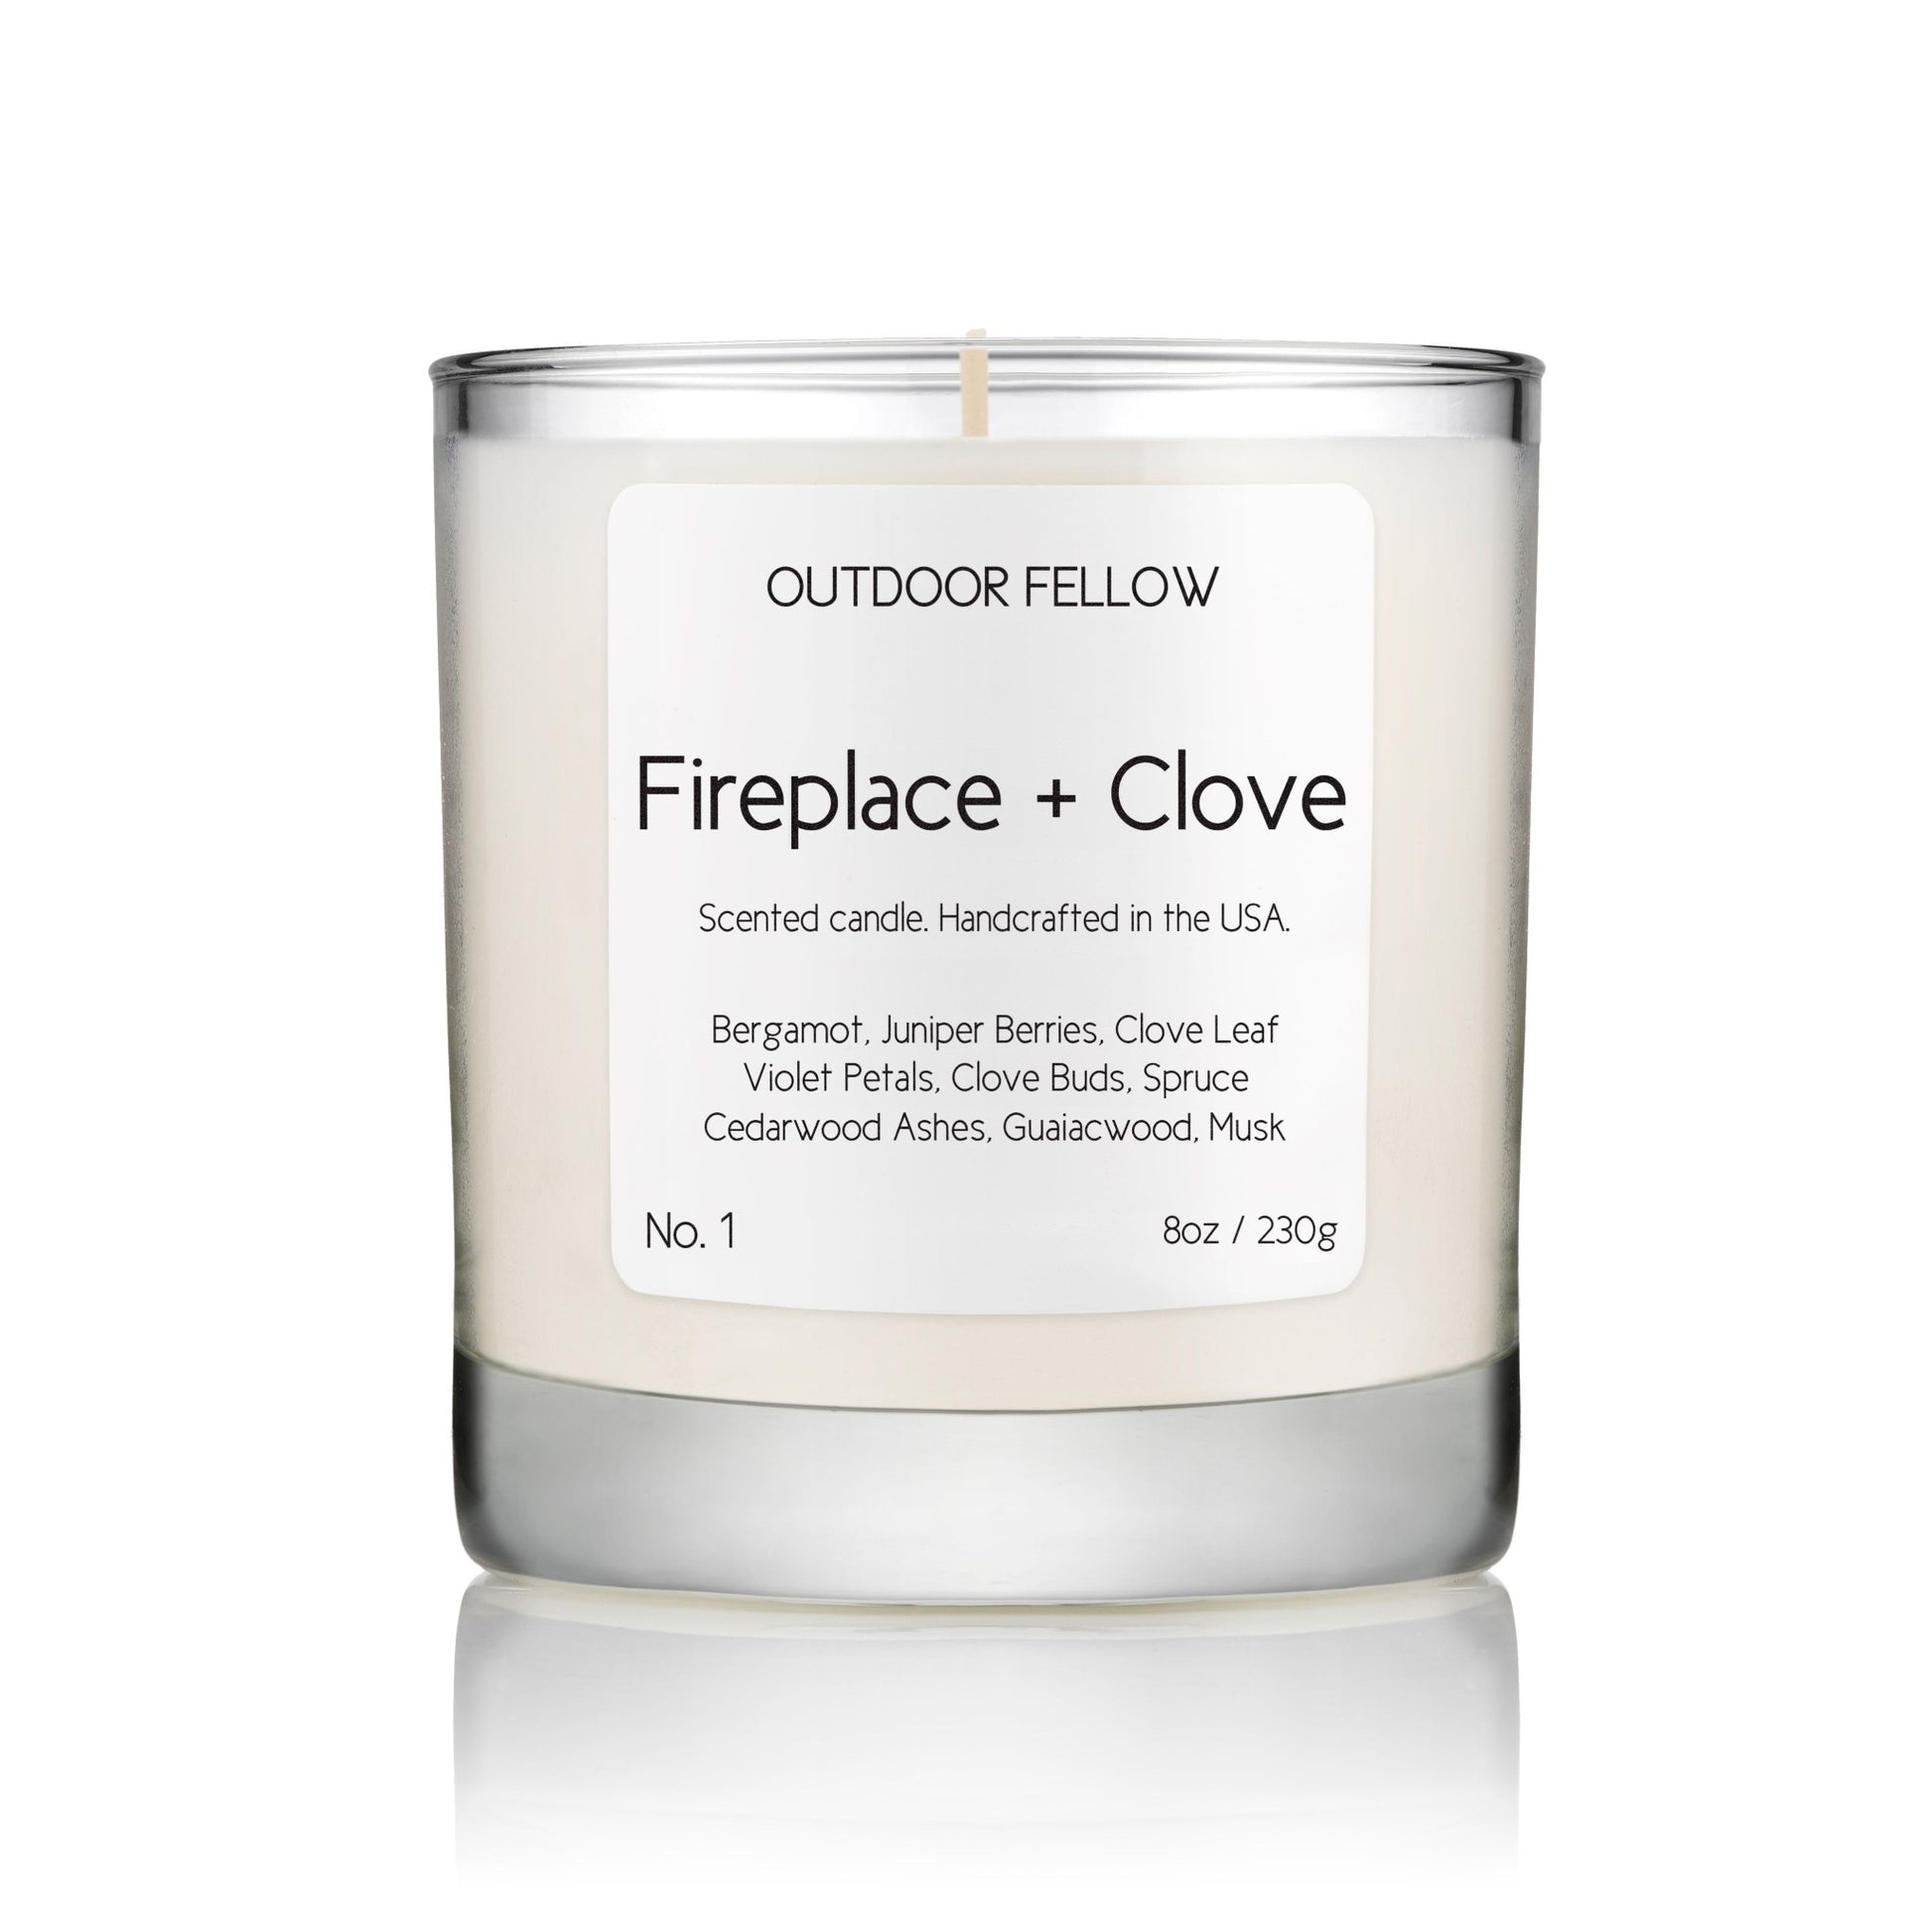 Fireplace and Clove scented candle on white background